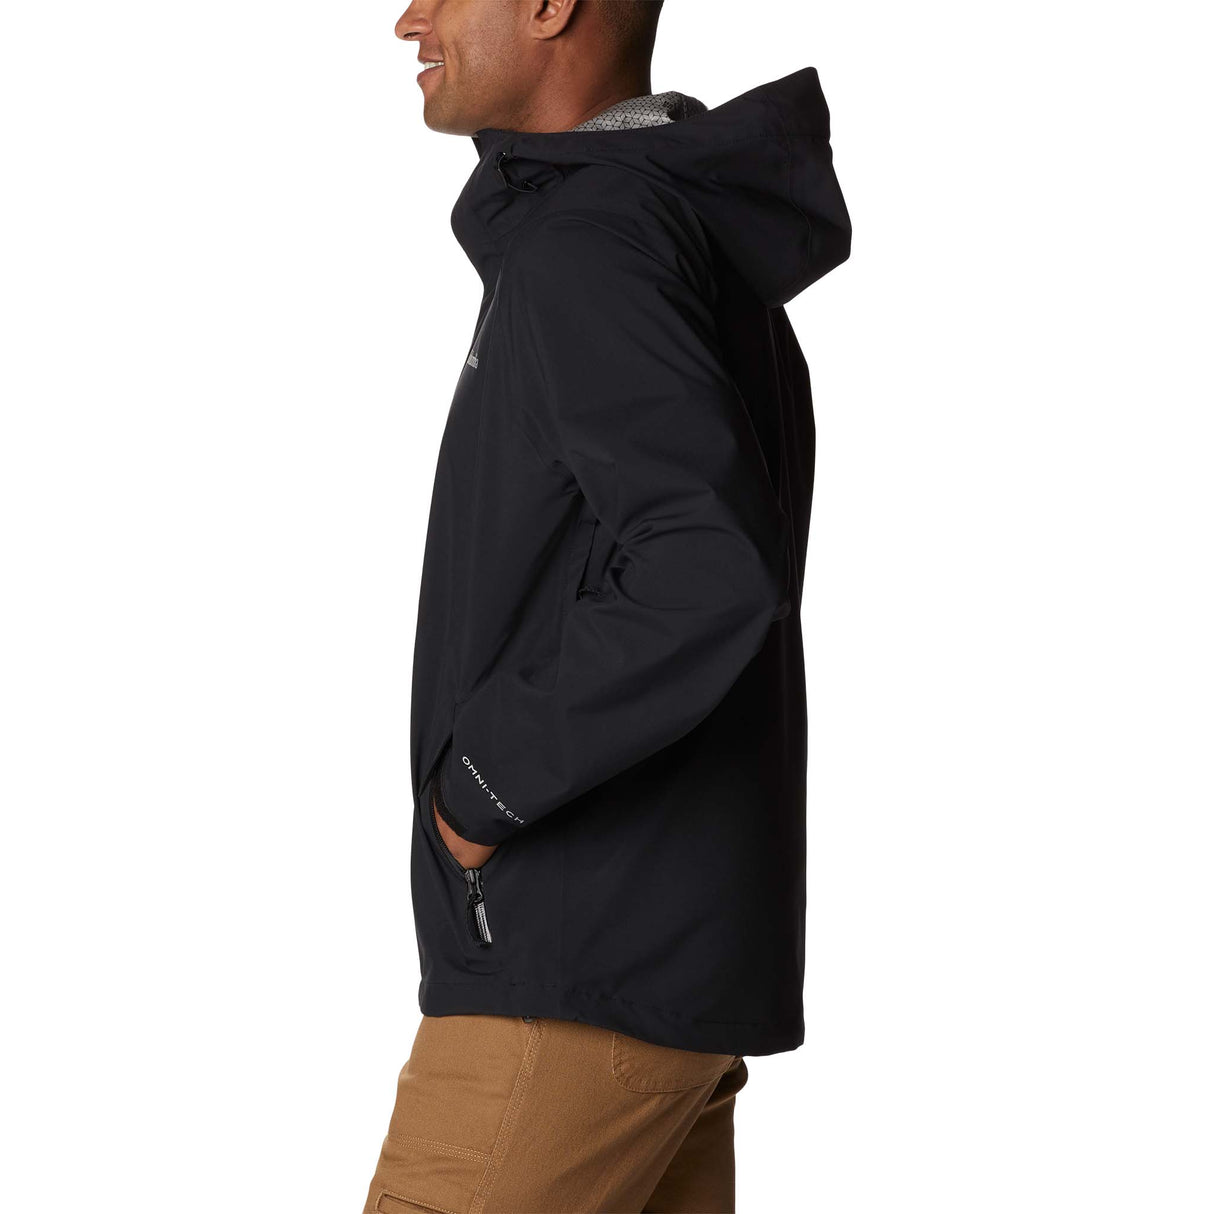 Columbia Earth Explorer manteau coquille noir homme lateral